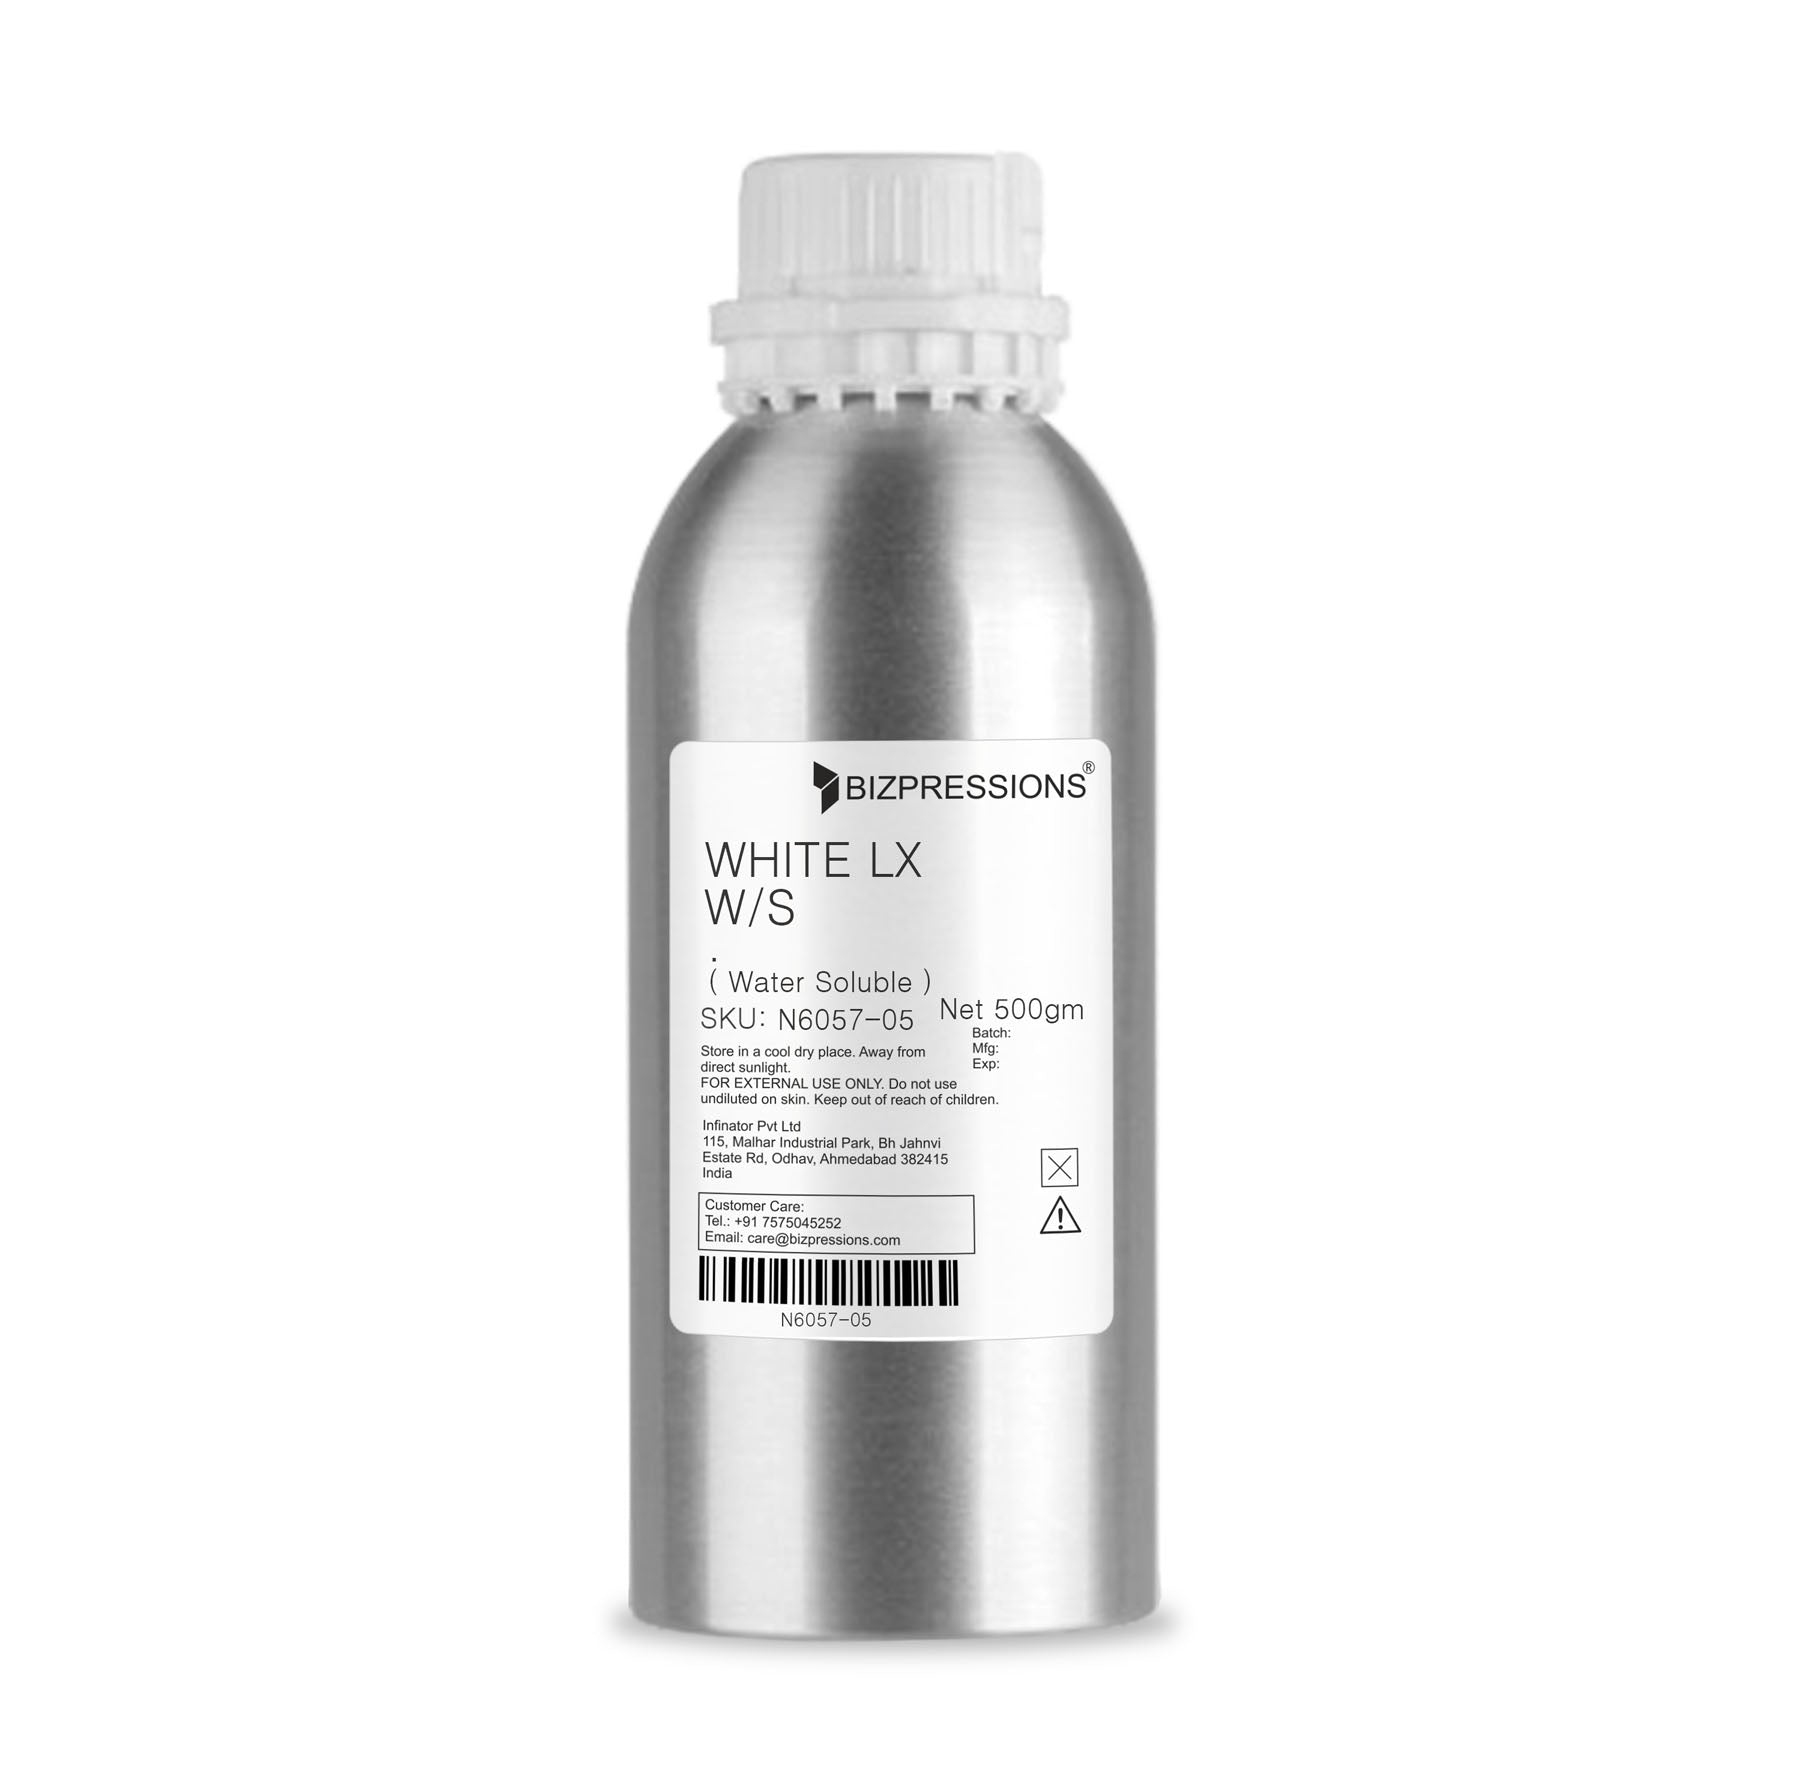 WHITE LX W/S - Fragrance ( Water Soluble ) - 500 gm